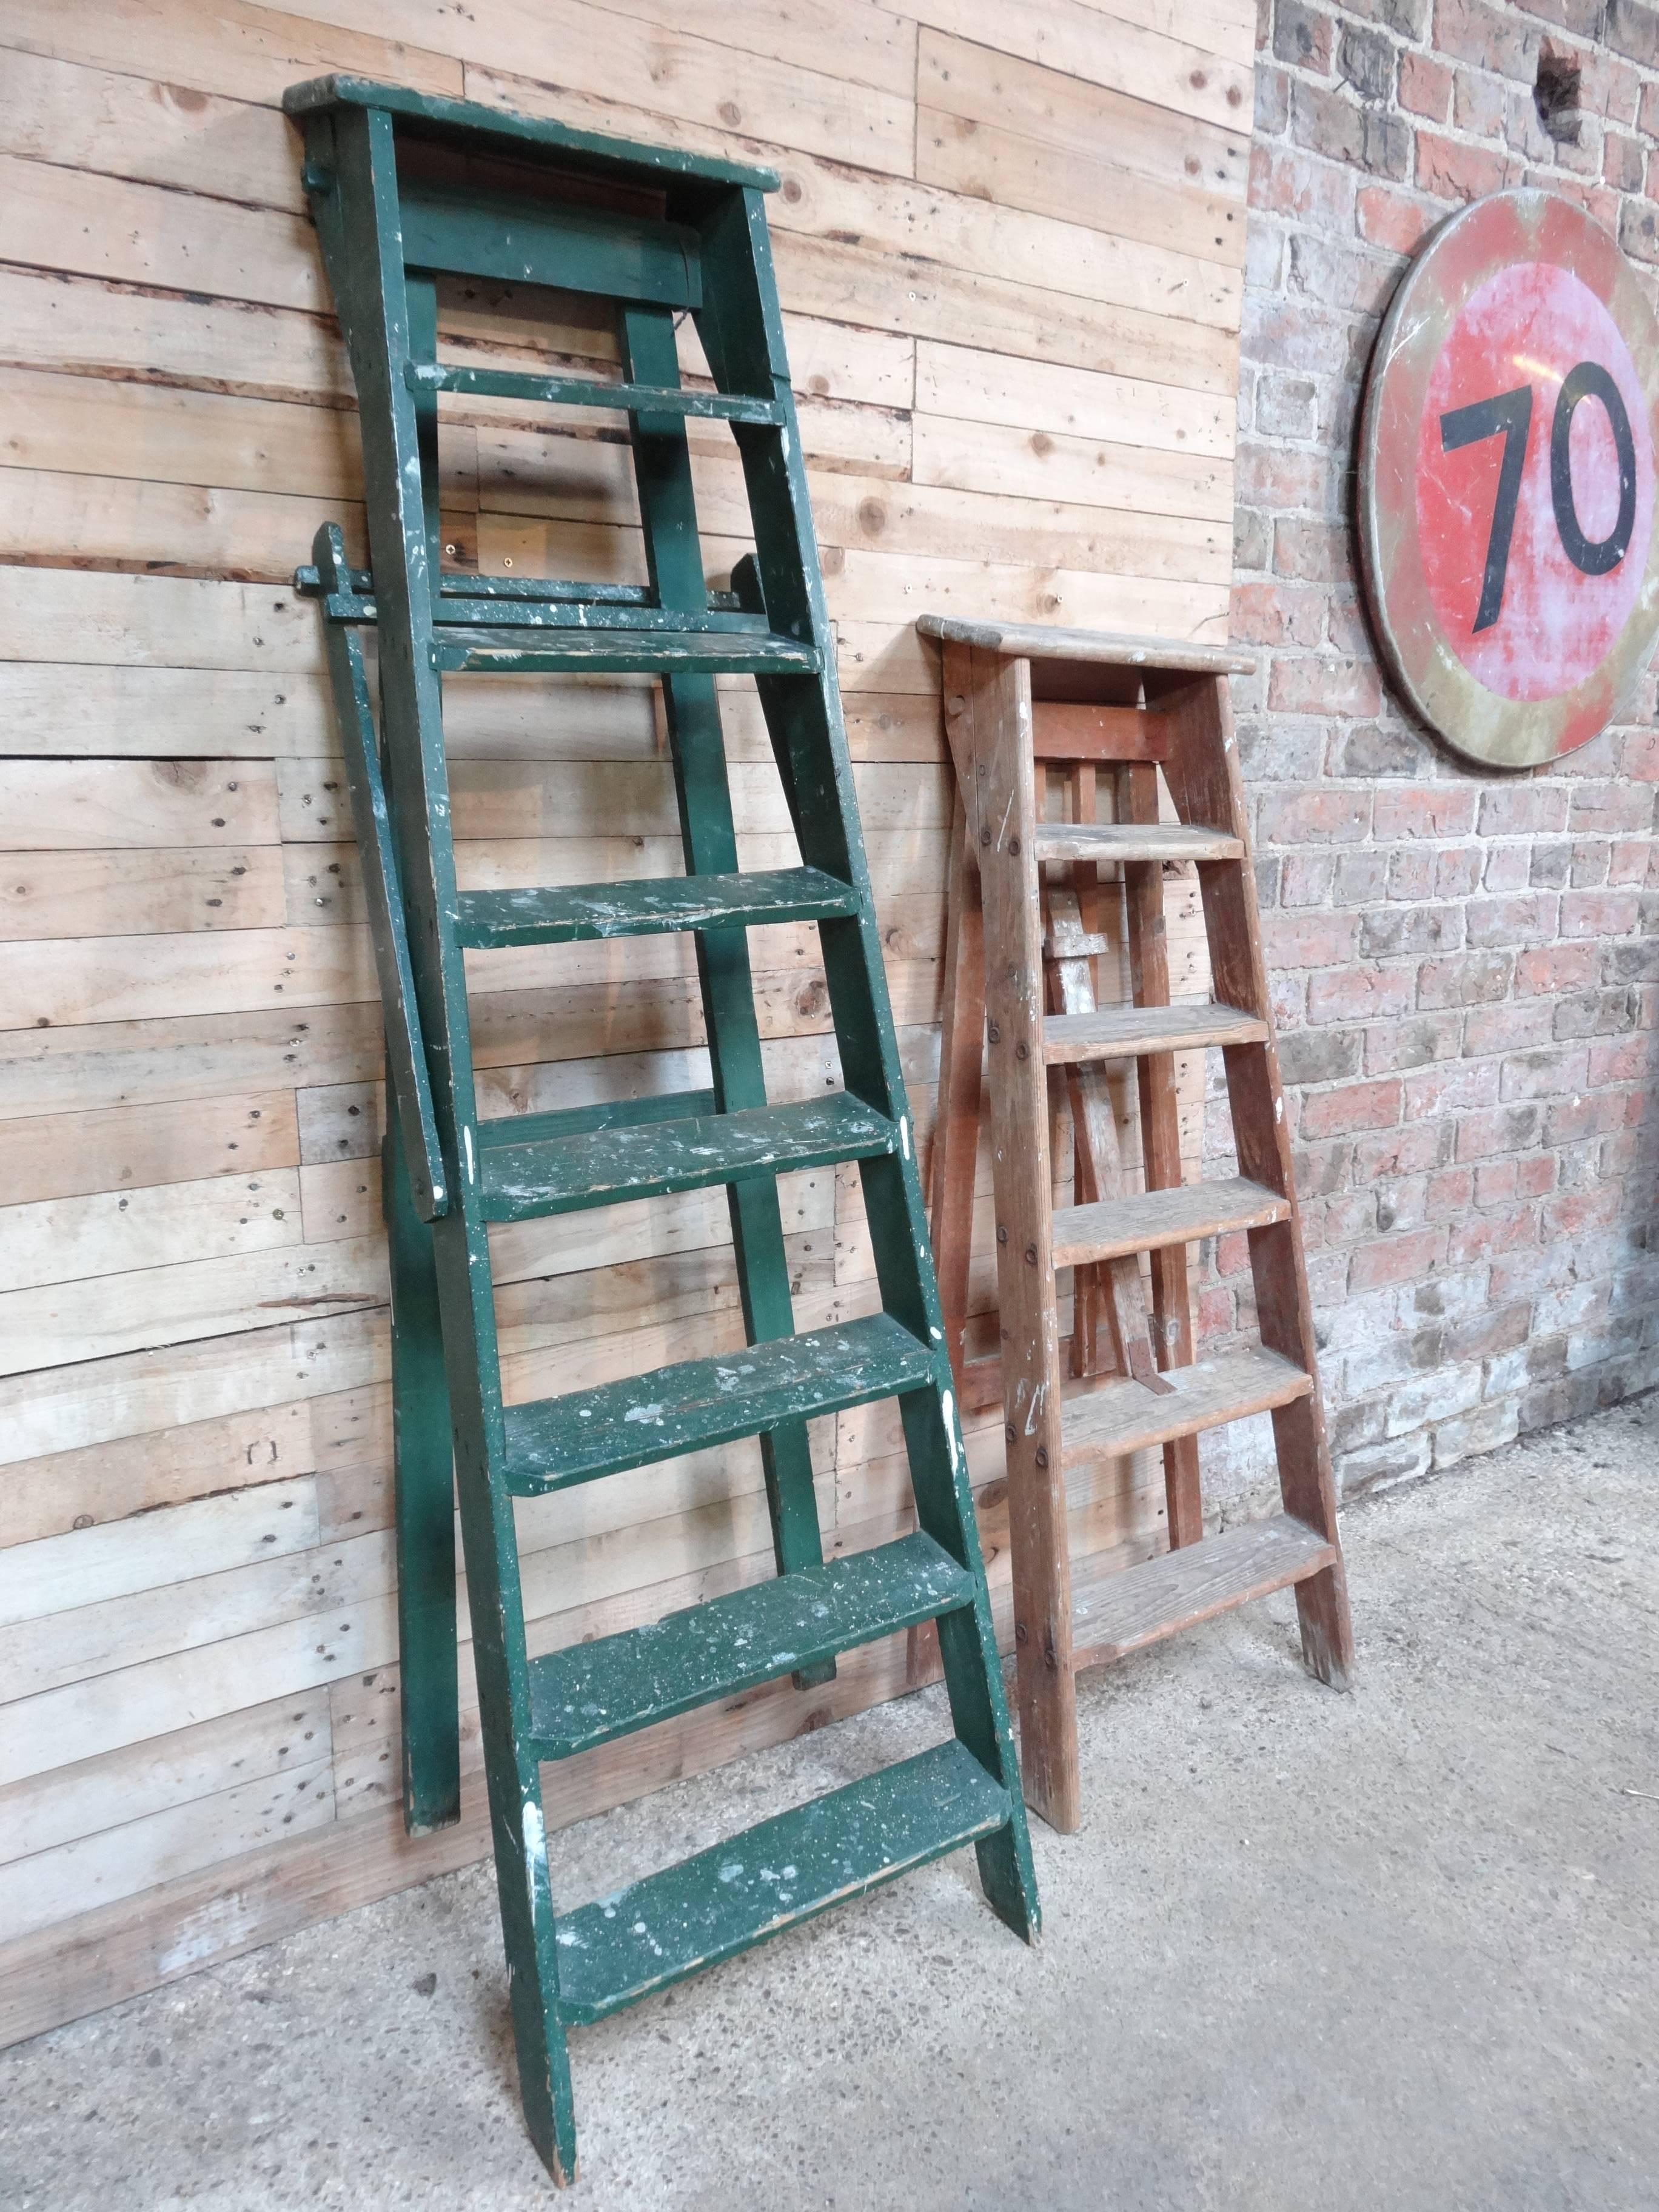 1900s French vintage green fruit picking / painting ladder.

Measures: Height 153cm, depth 100cm, width 51cm.